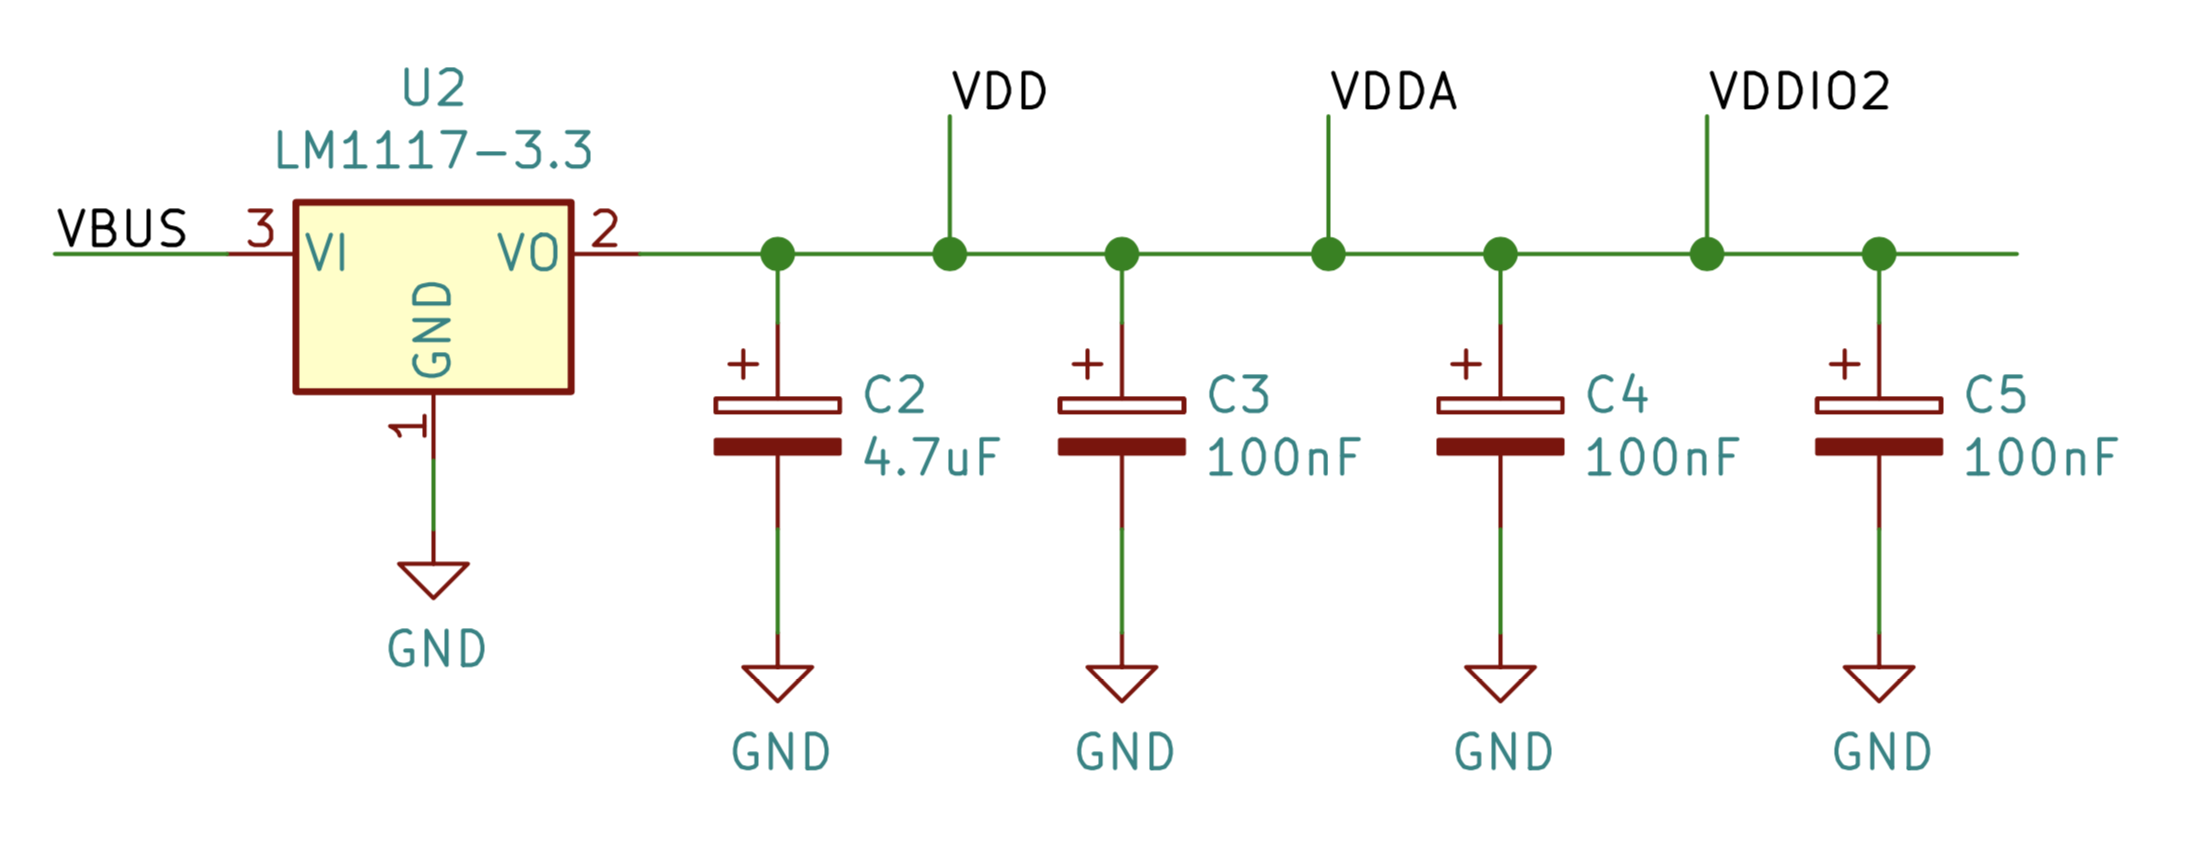 The filtering capacitors placed nearby VDD, VDDA and VDDIO2